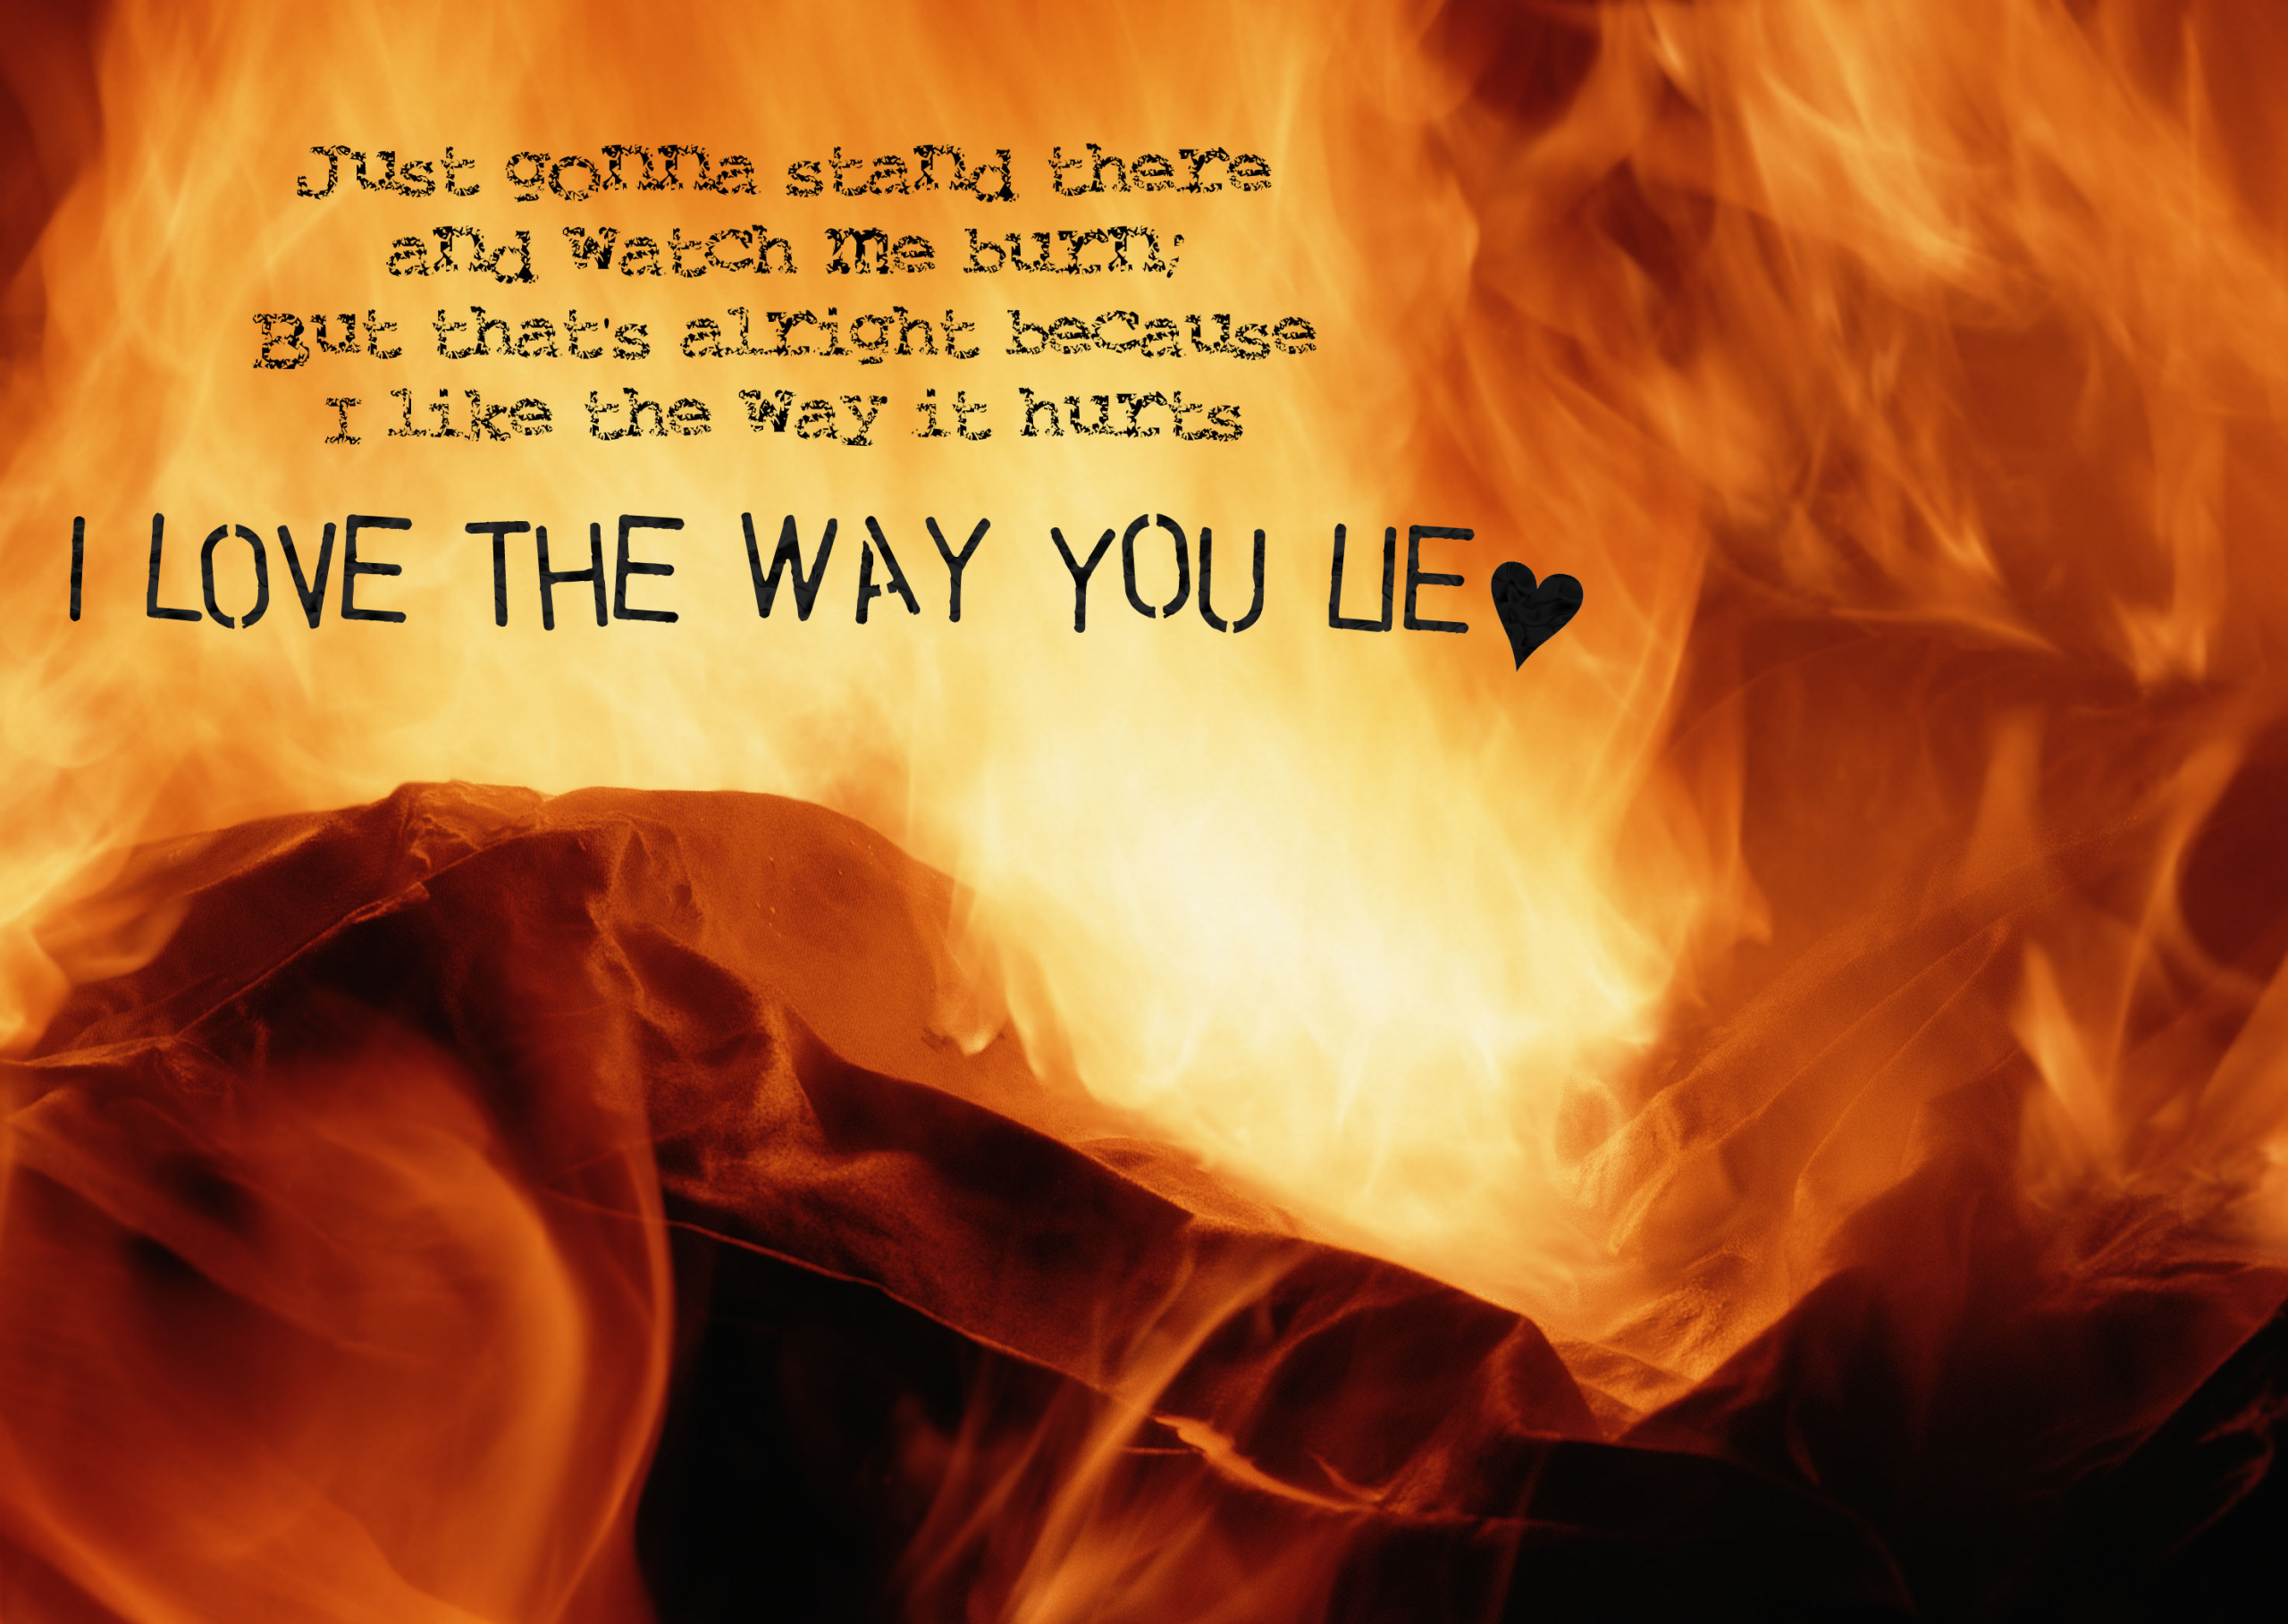 Fire Love Quotes
 Download Love Fire Wallpaper 2950x2094